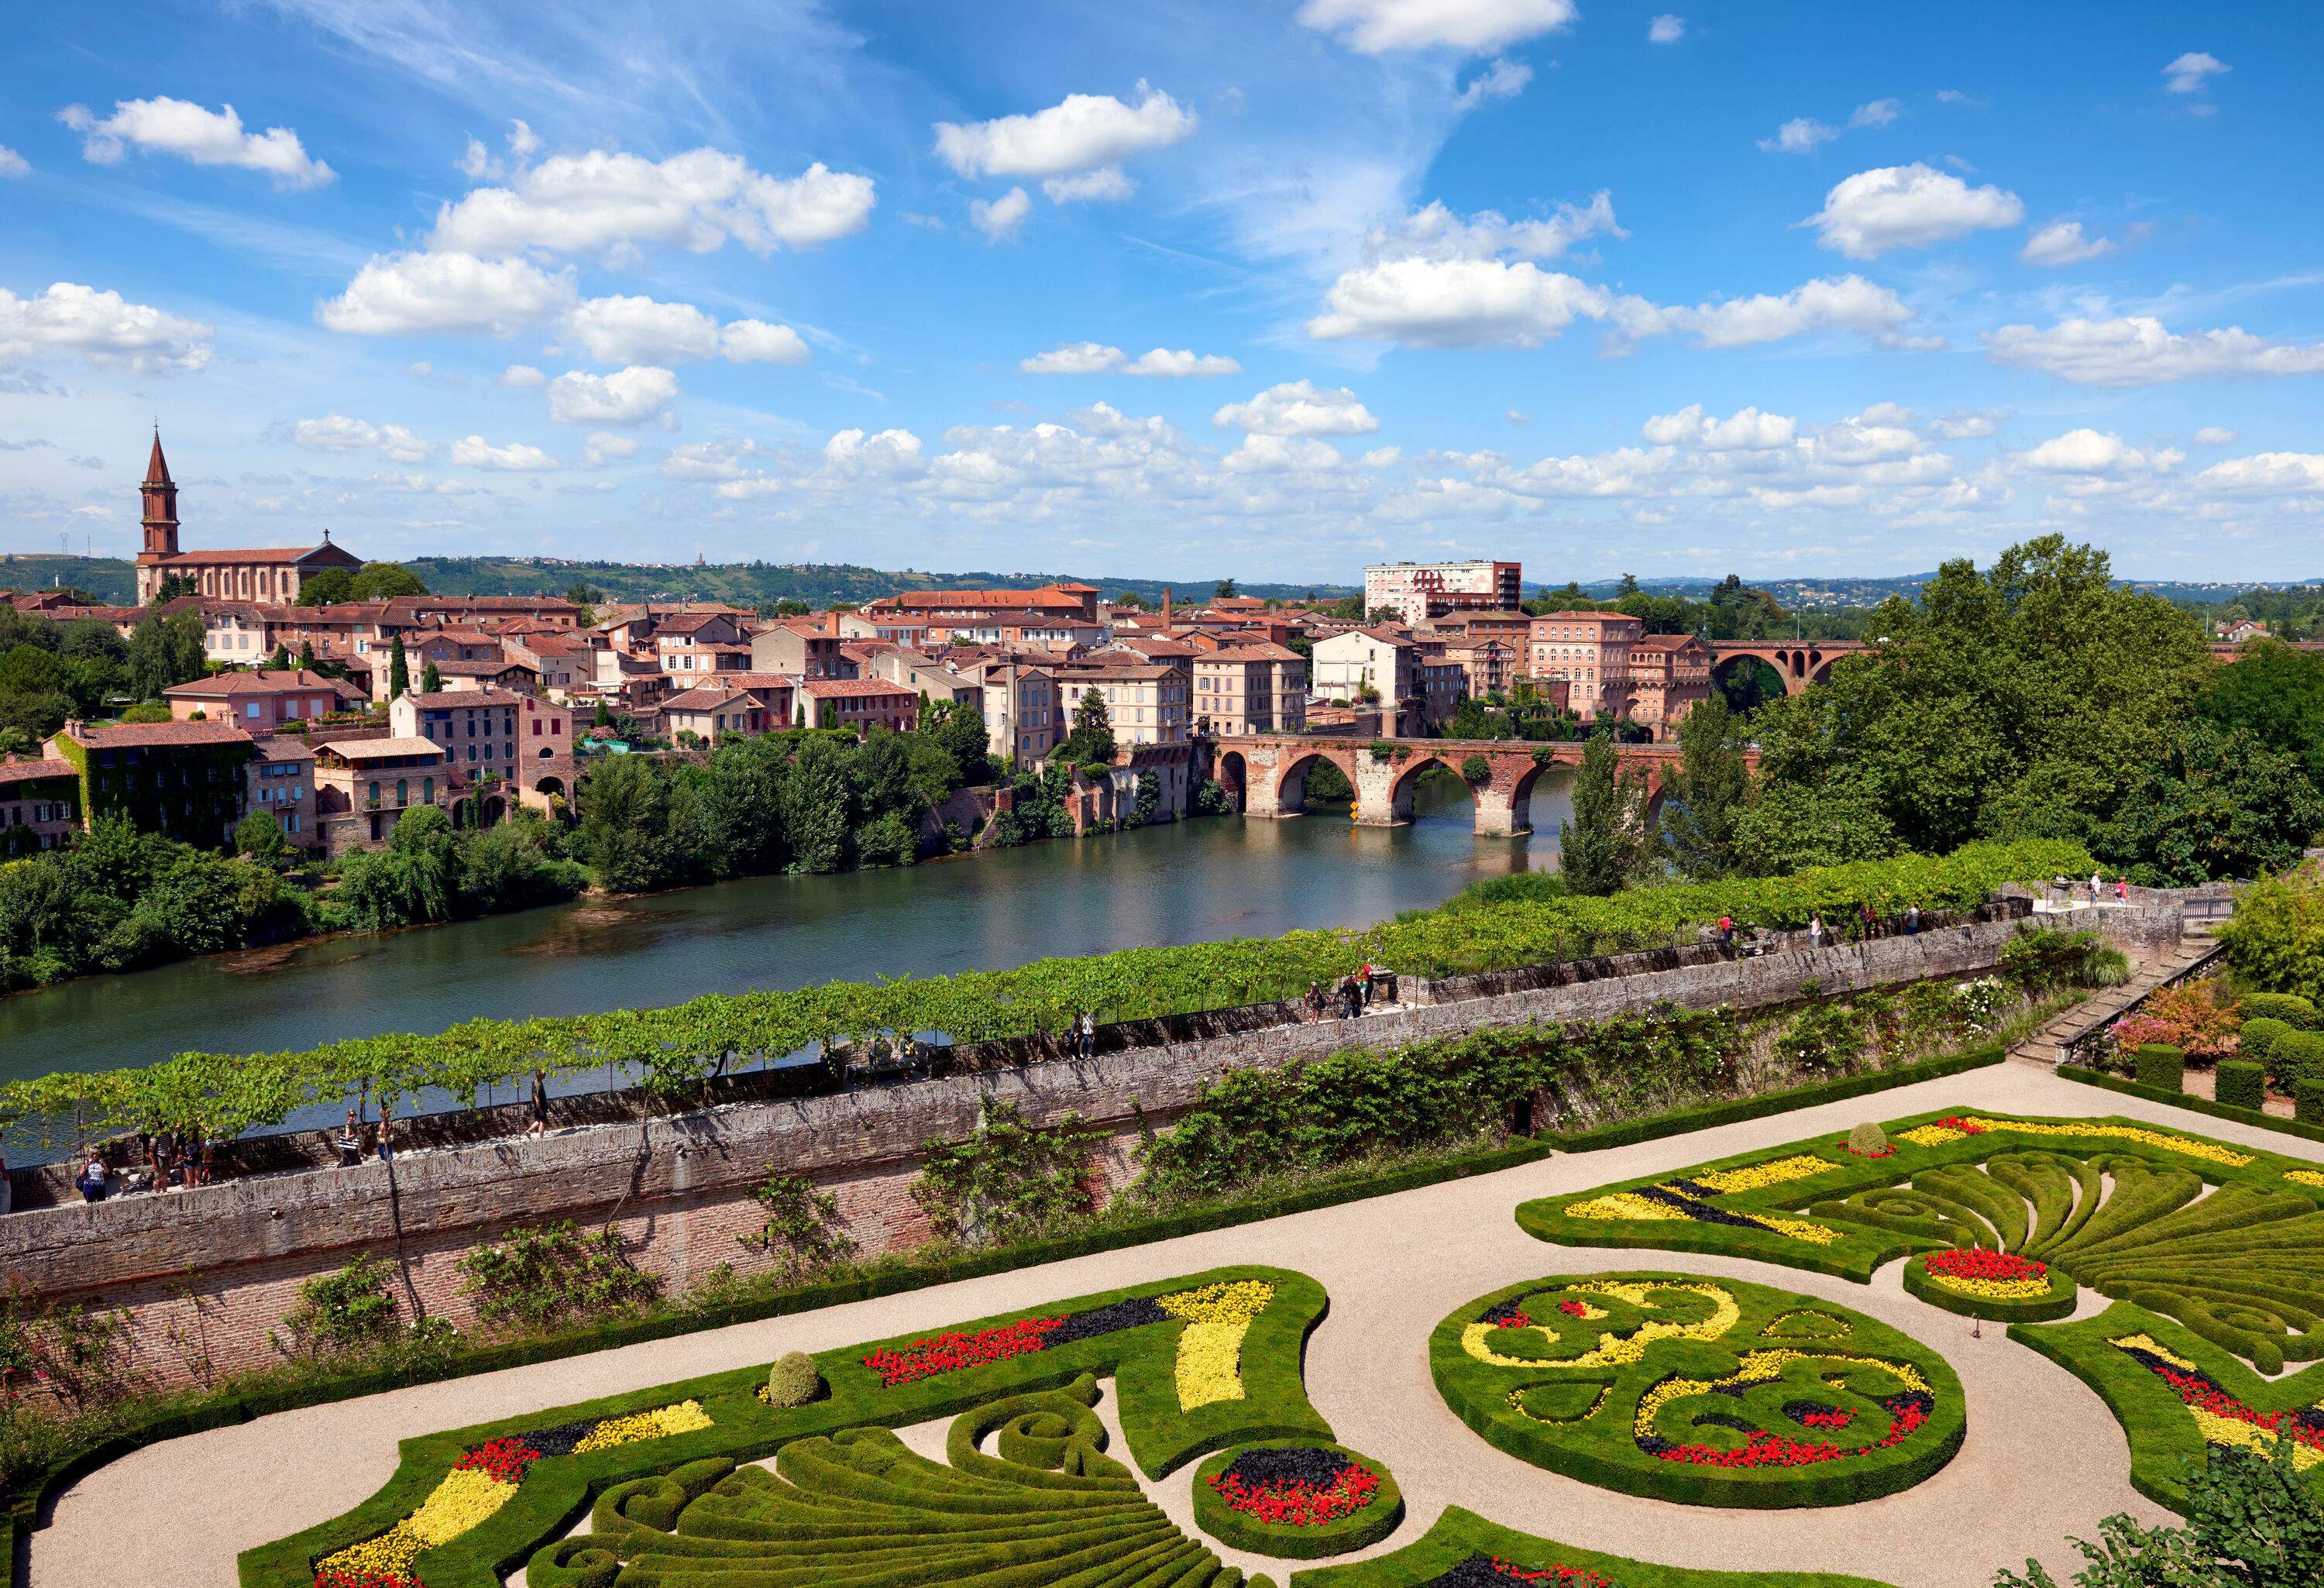 An ornamental hedge garden with an old town and a river bridge in the backdrop.